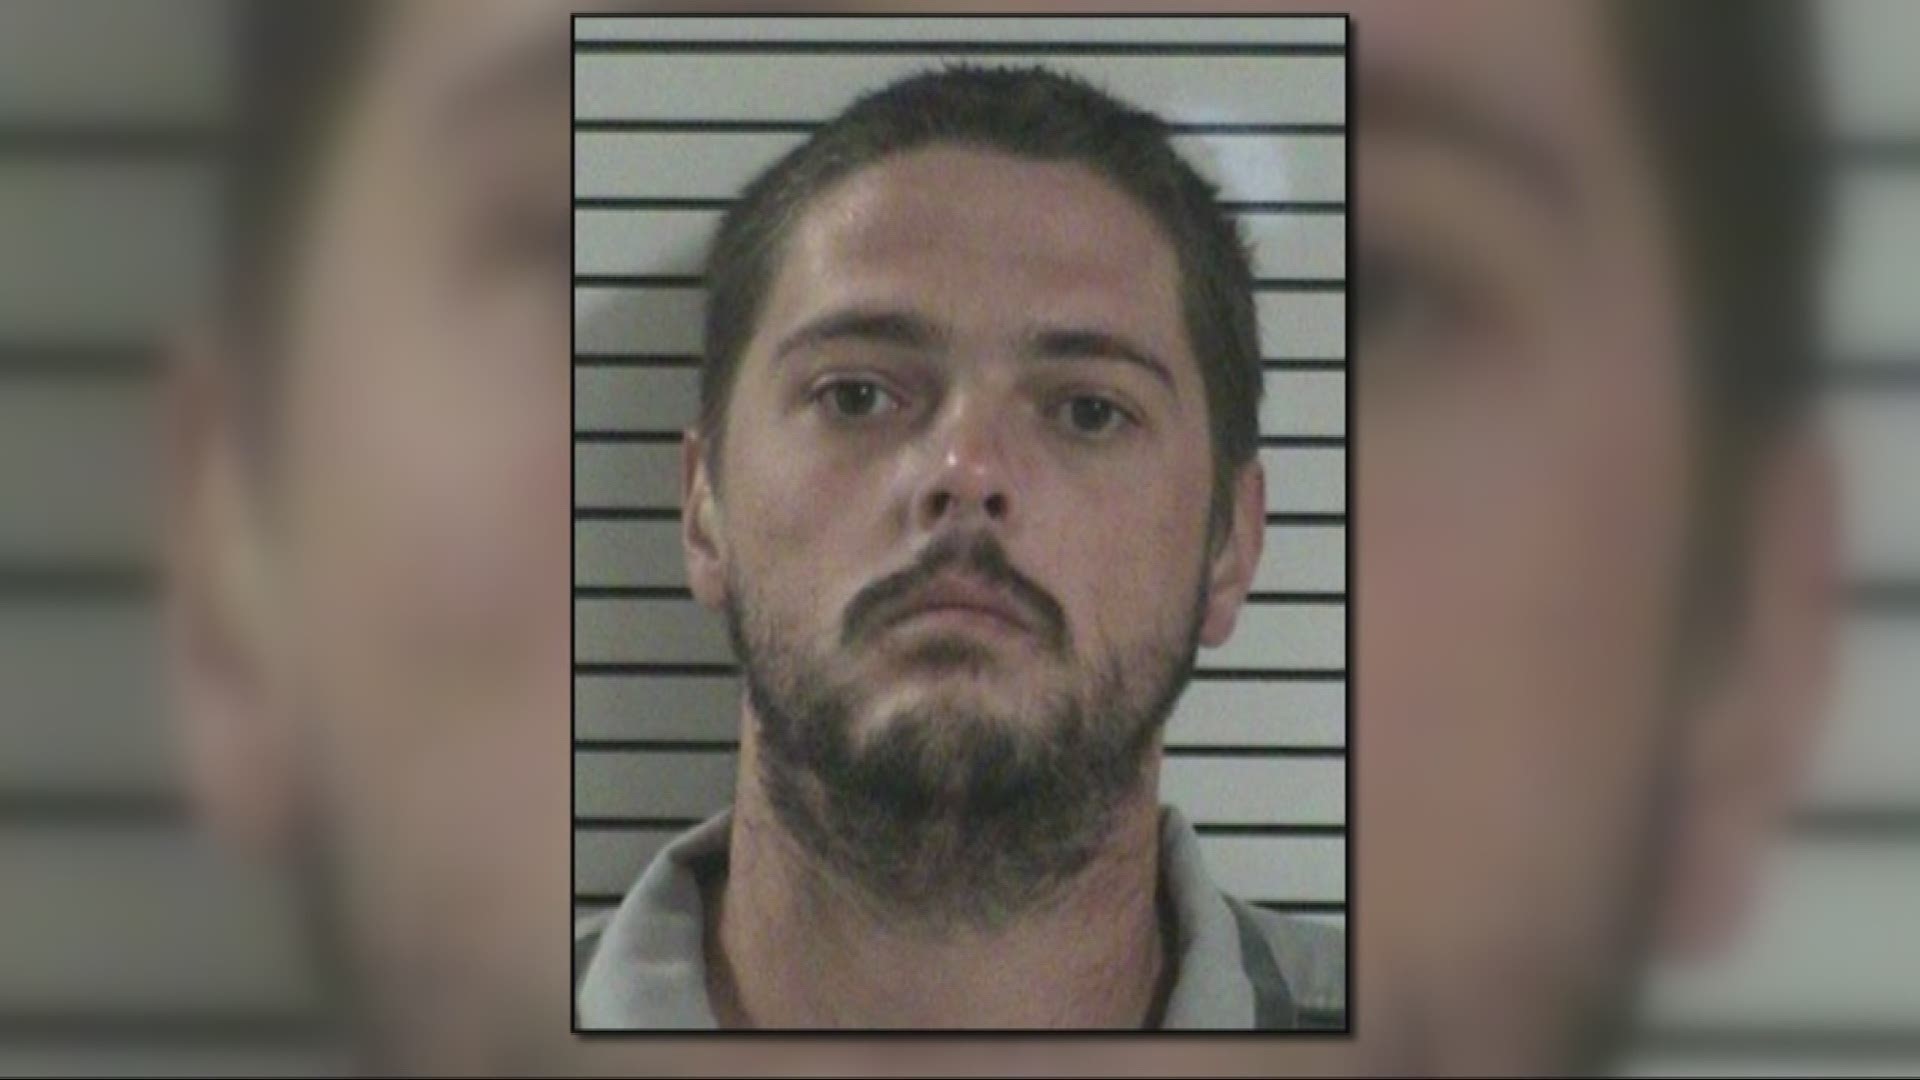 Iredell County man arrested on sexual assault charges